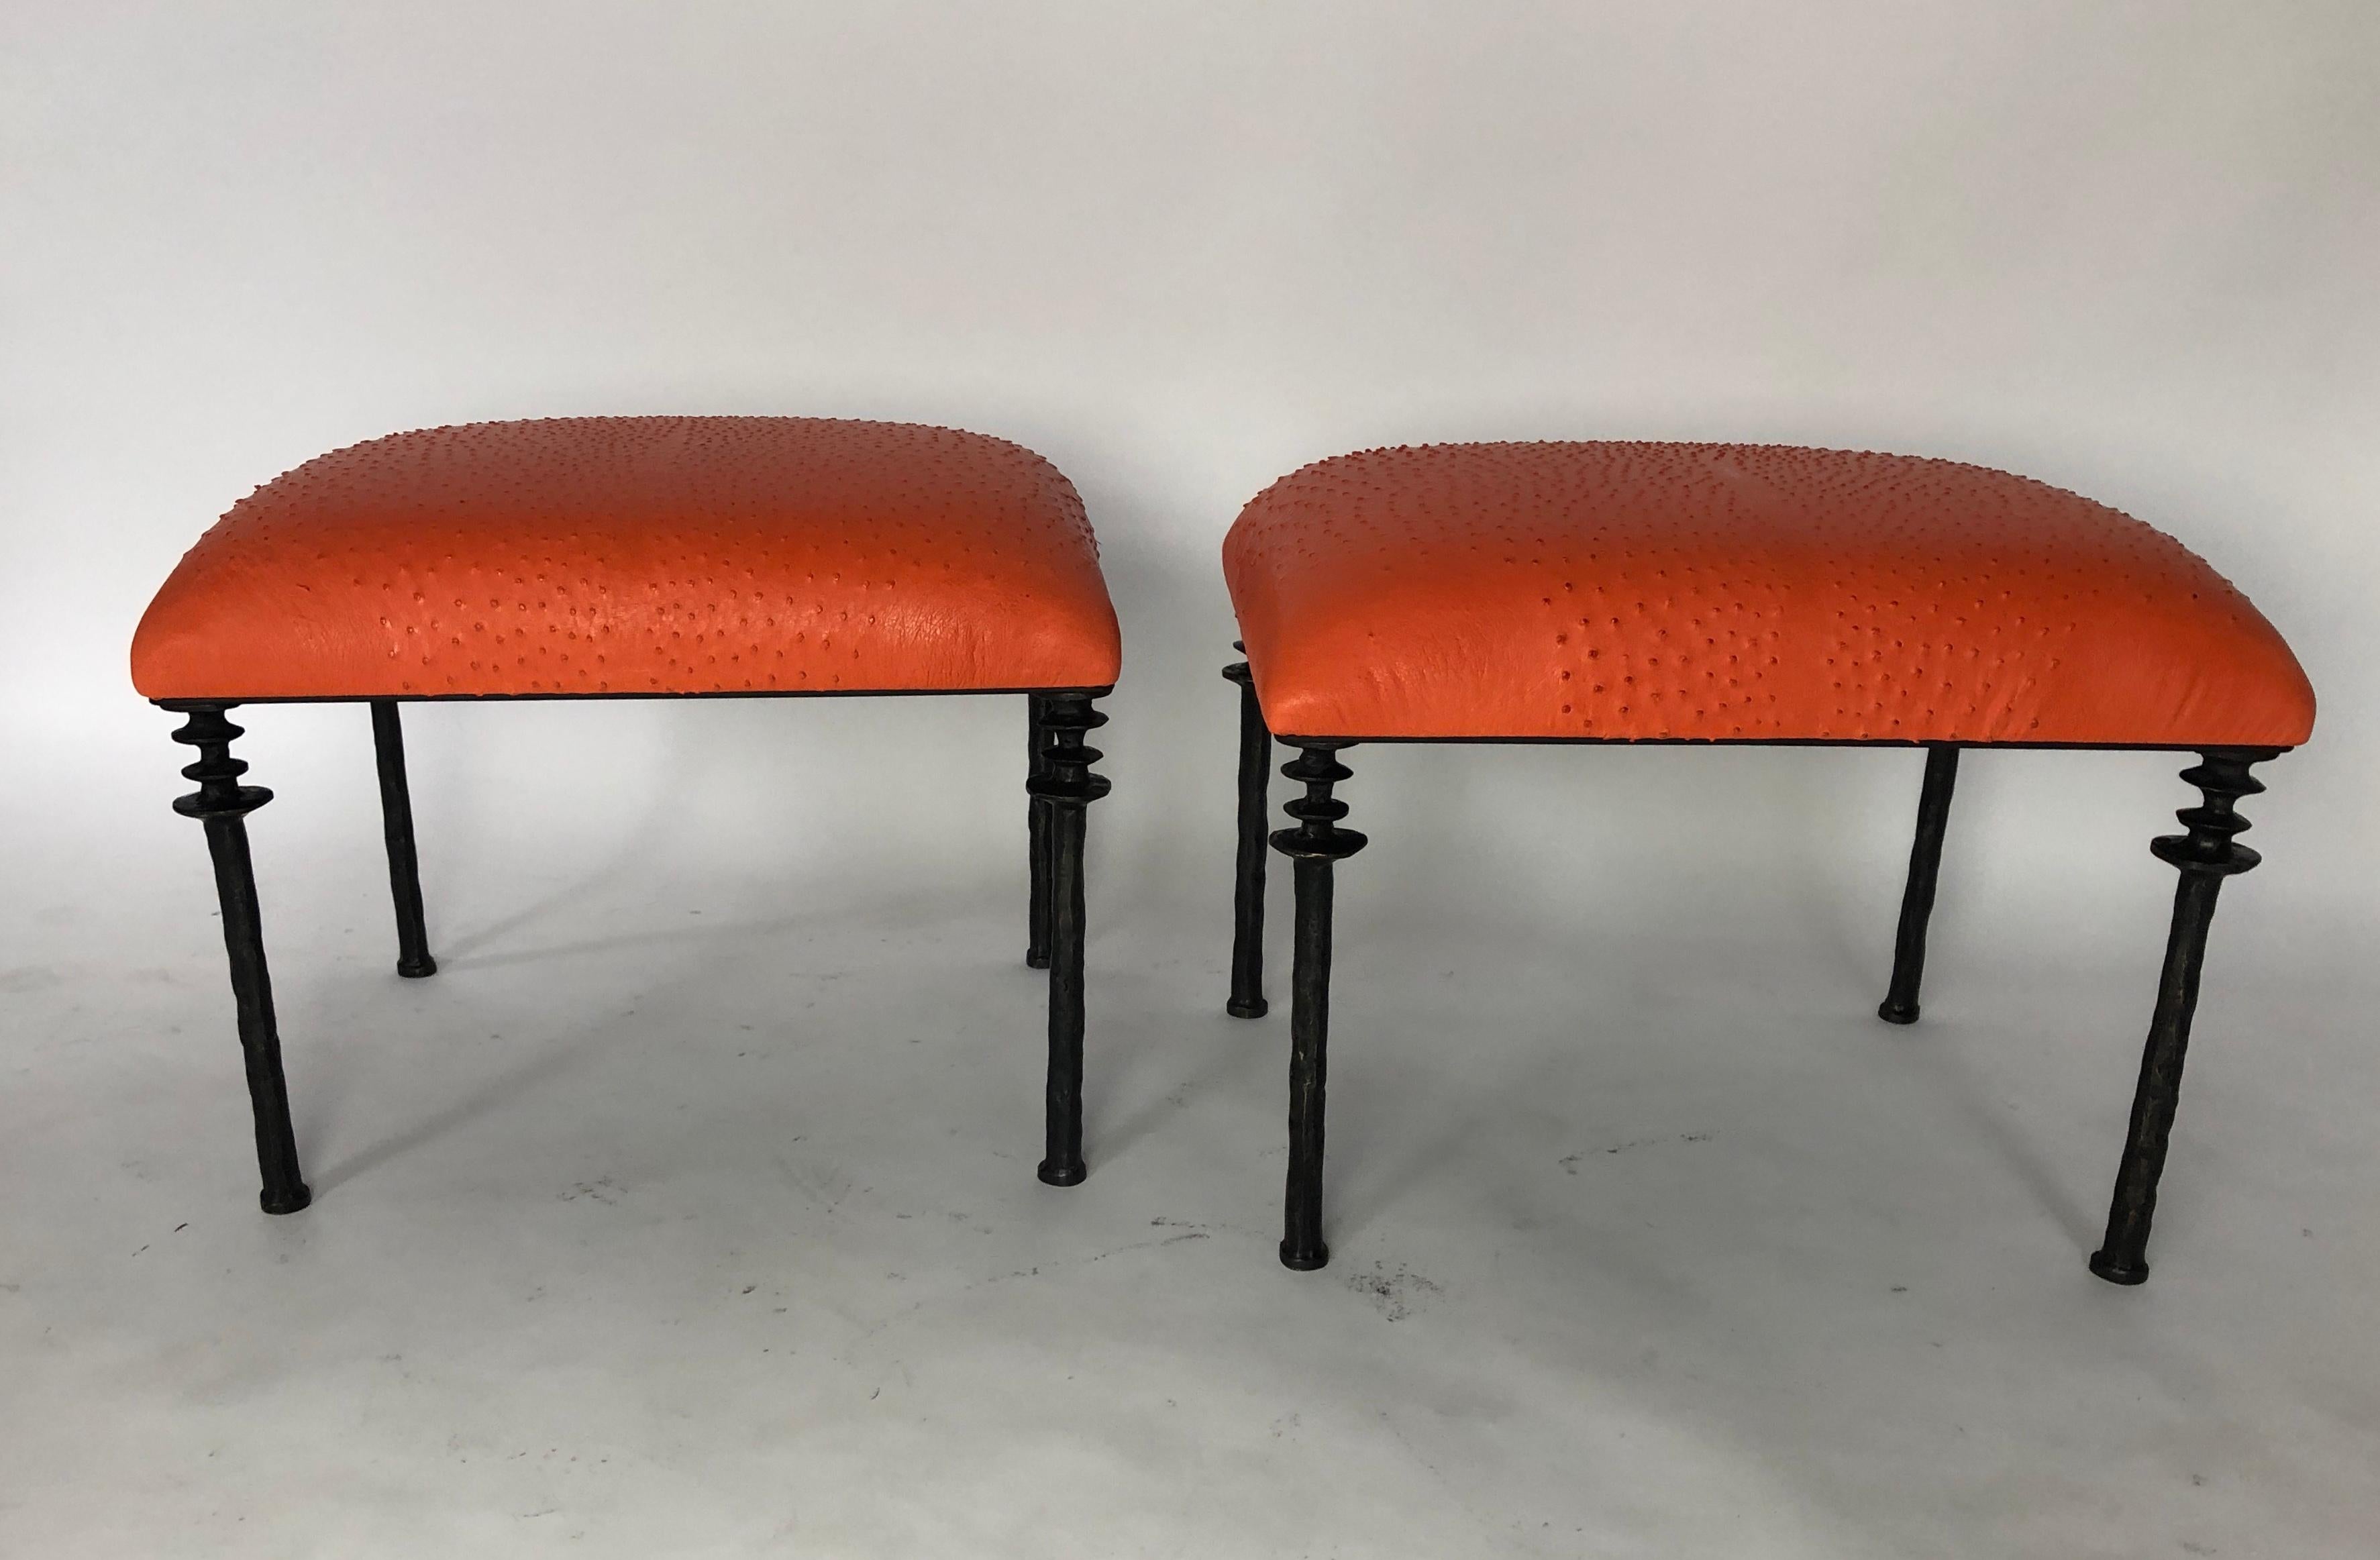 Two beautiful stools inspired by Diego Giacometti, these stools are ideal for those who are looking for unique seating. Their cast bronze legs provide a truly organic touch. The seat cushion has been upholstered in a striking tangerine ostrich